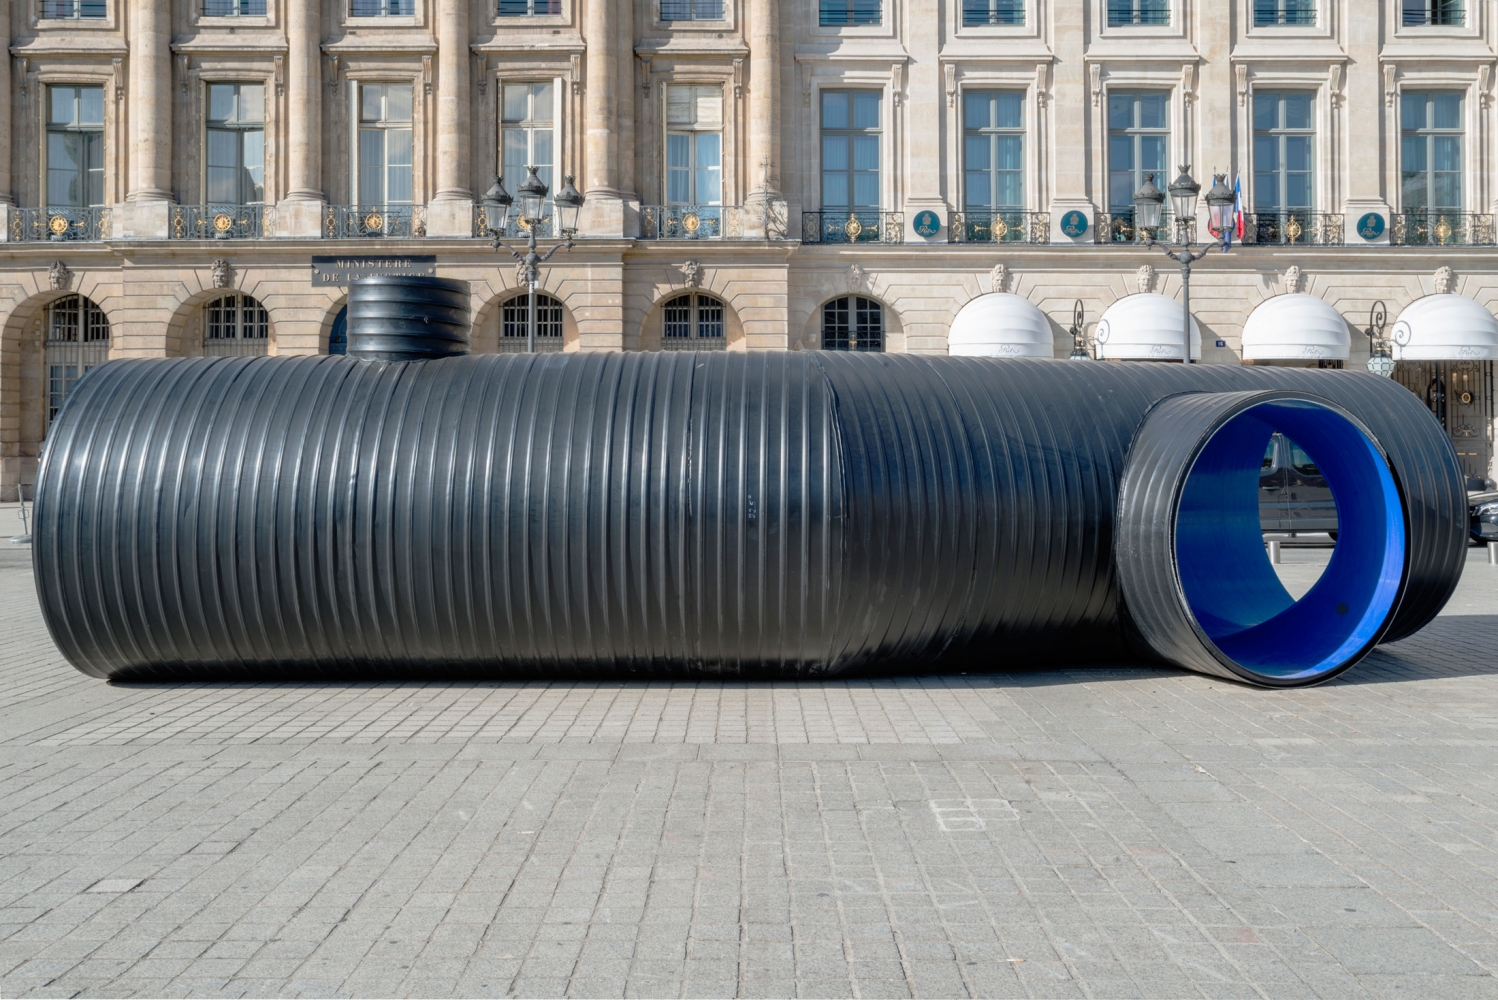 Oscar Tuazon
Life Prototype, 2017
One of four elements in&amp;nbsp;Une Colonne d&amp;#39;Eau, 2017
Thermoplastic hoses, tree trunks
105 2/3&amp;nbsp;x&amp;nbsp;82 3/4 x 341 inches
(268&amp;nbsp;x 210 x 989 cm)
Installation view
Place Vend&amp;ocirc;me, Paris&amp;nbsp;(October 16 &amp;ndash; November 9, 2017)
Photograph by Marc Domage